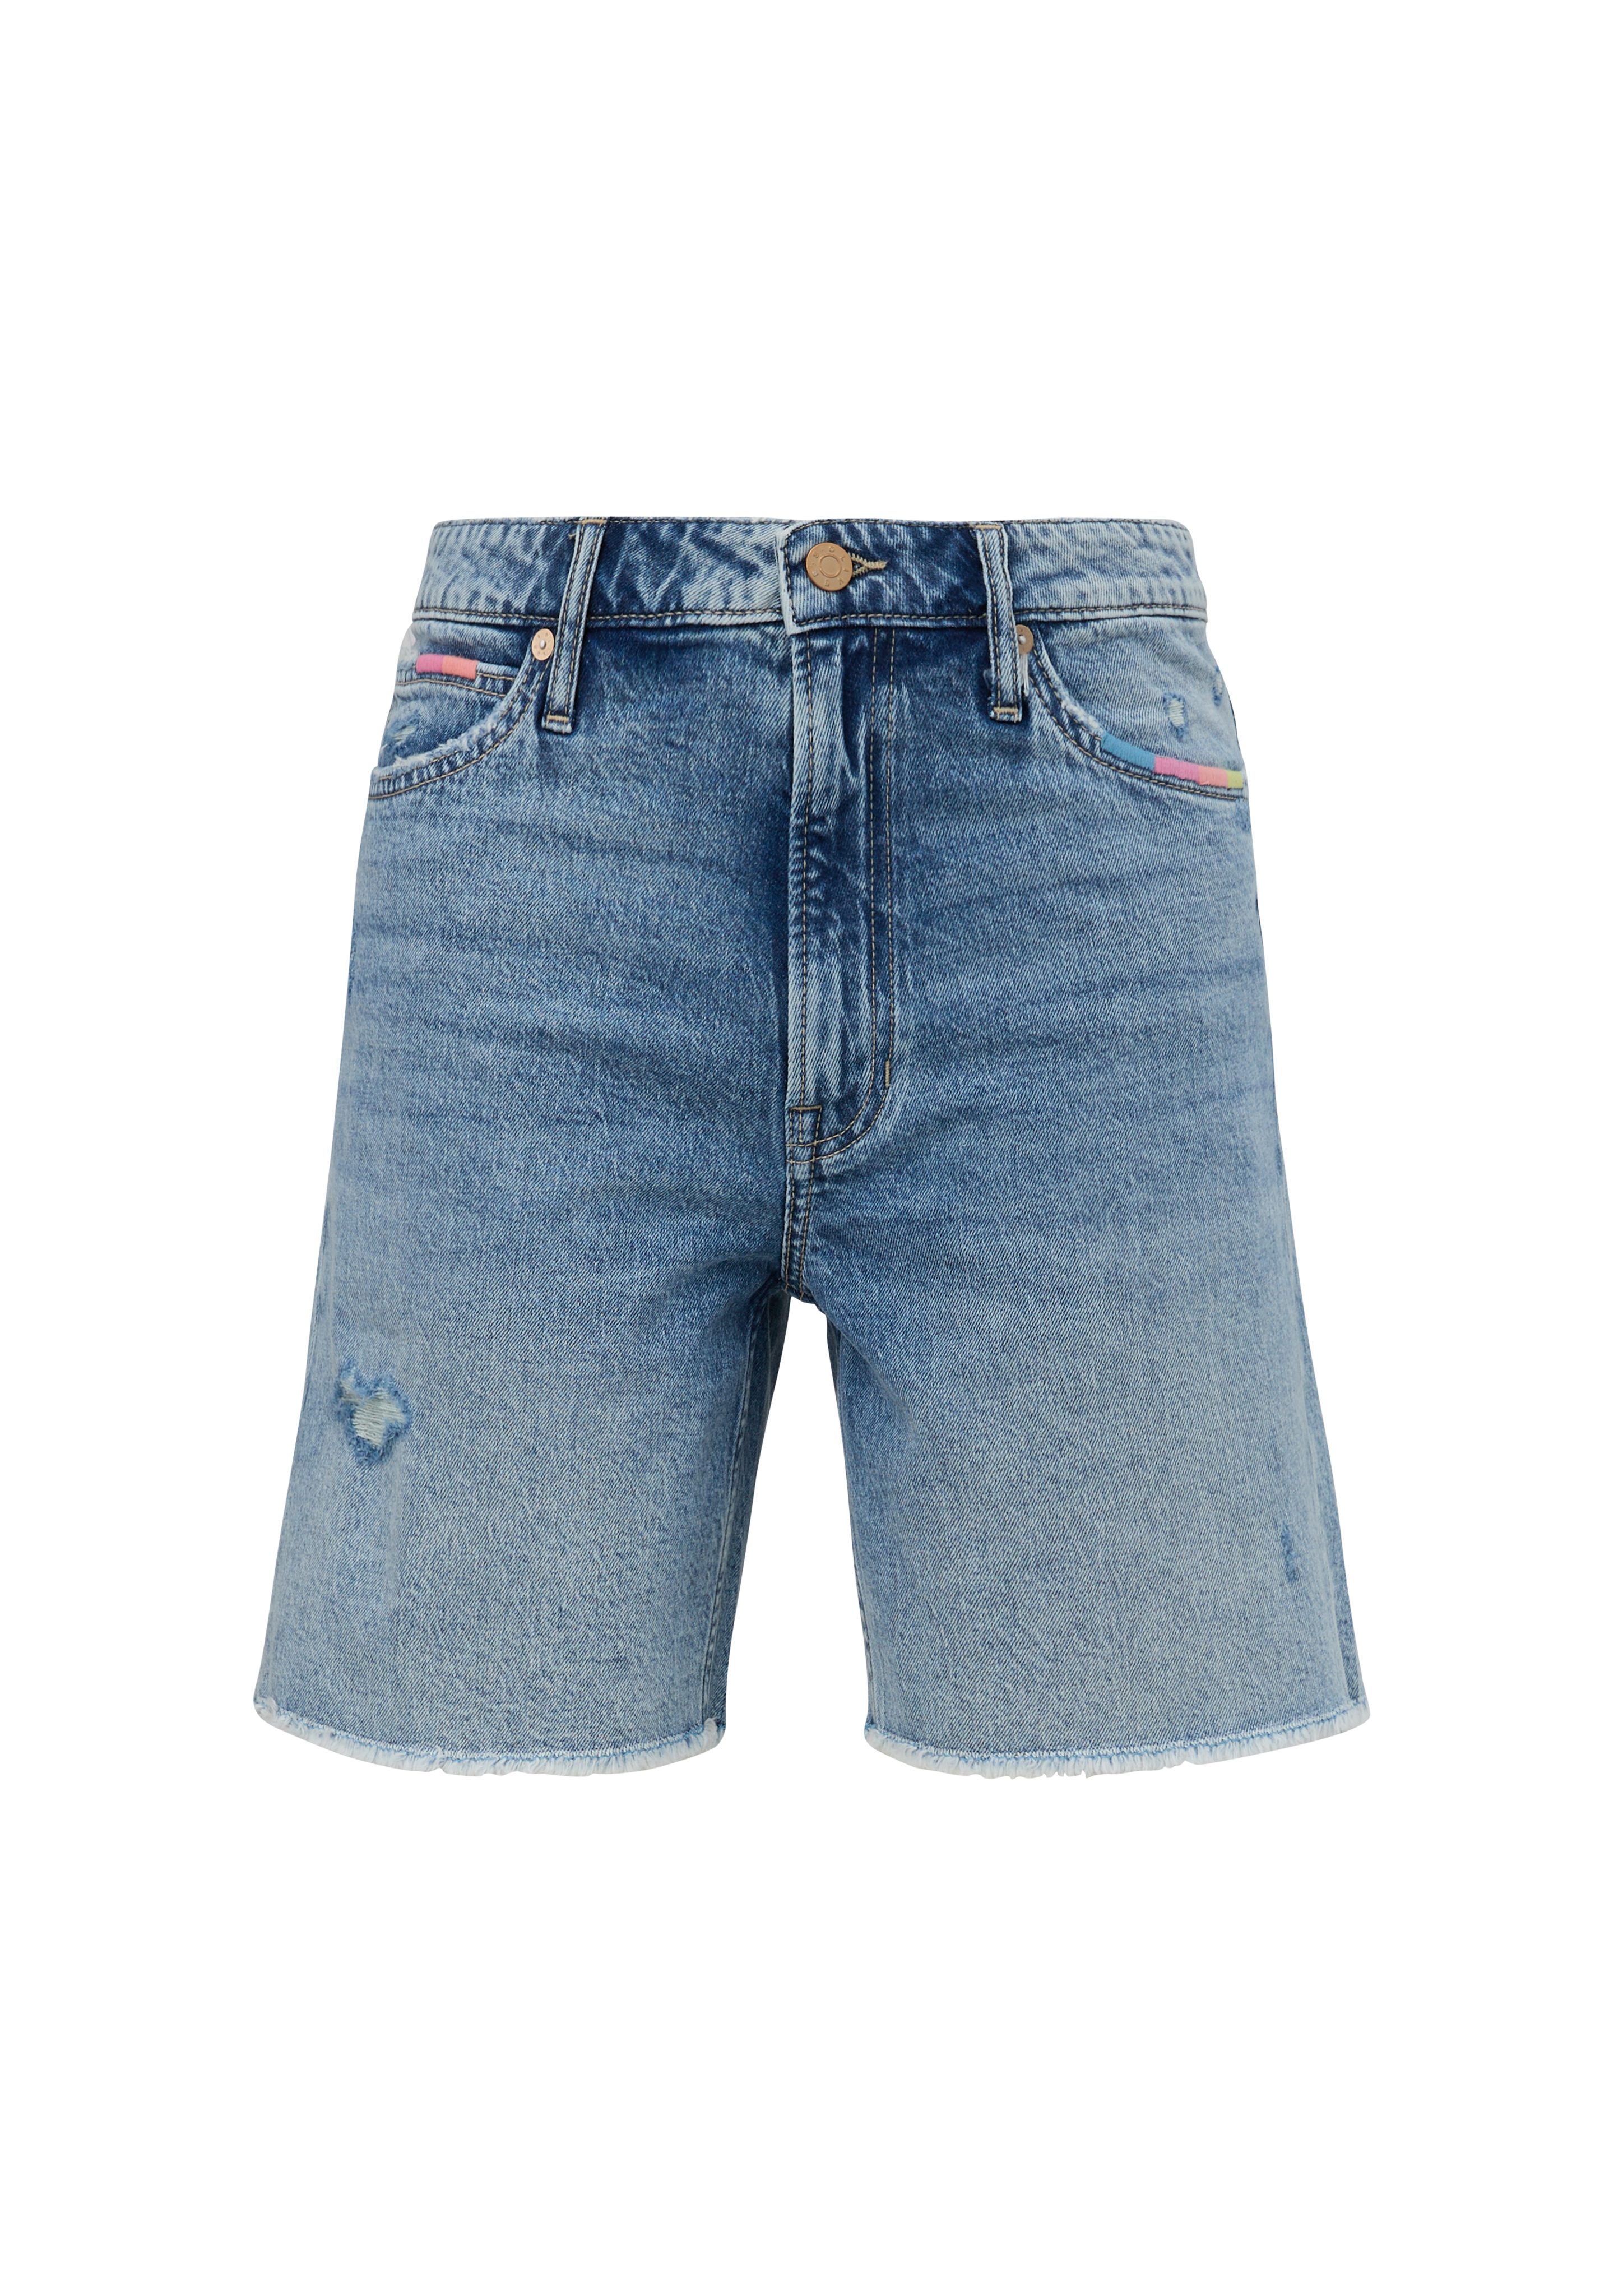 s.Oliver Jeansshorts Jeans-Shorts / Destroyes, Rise Straight Kontrast-Details Waschung, / Leg Mid / Relaxed Fit